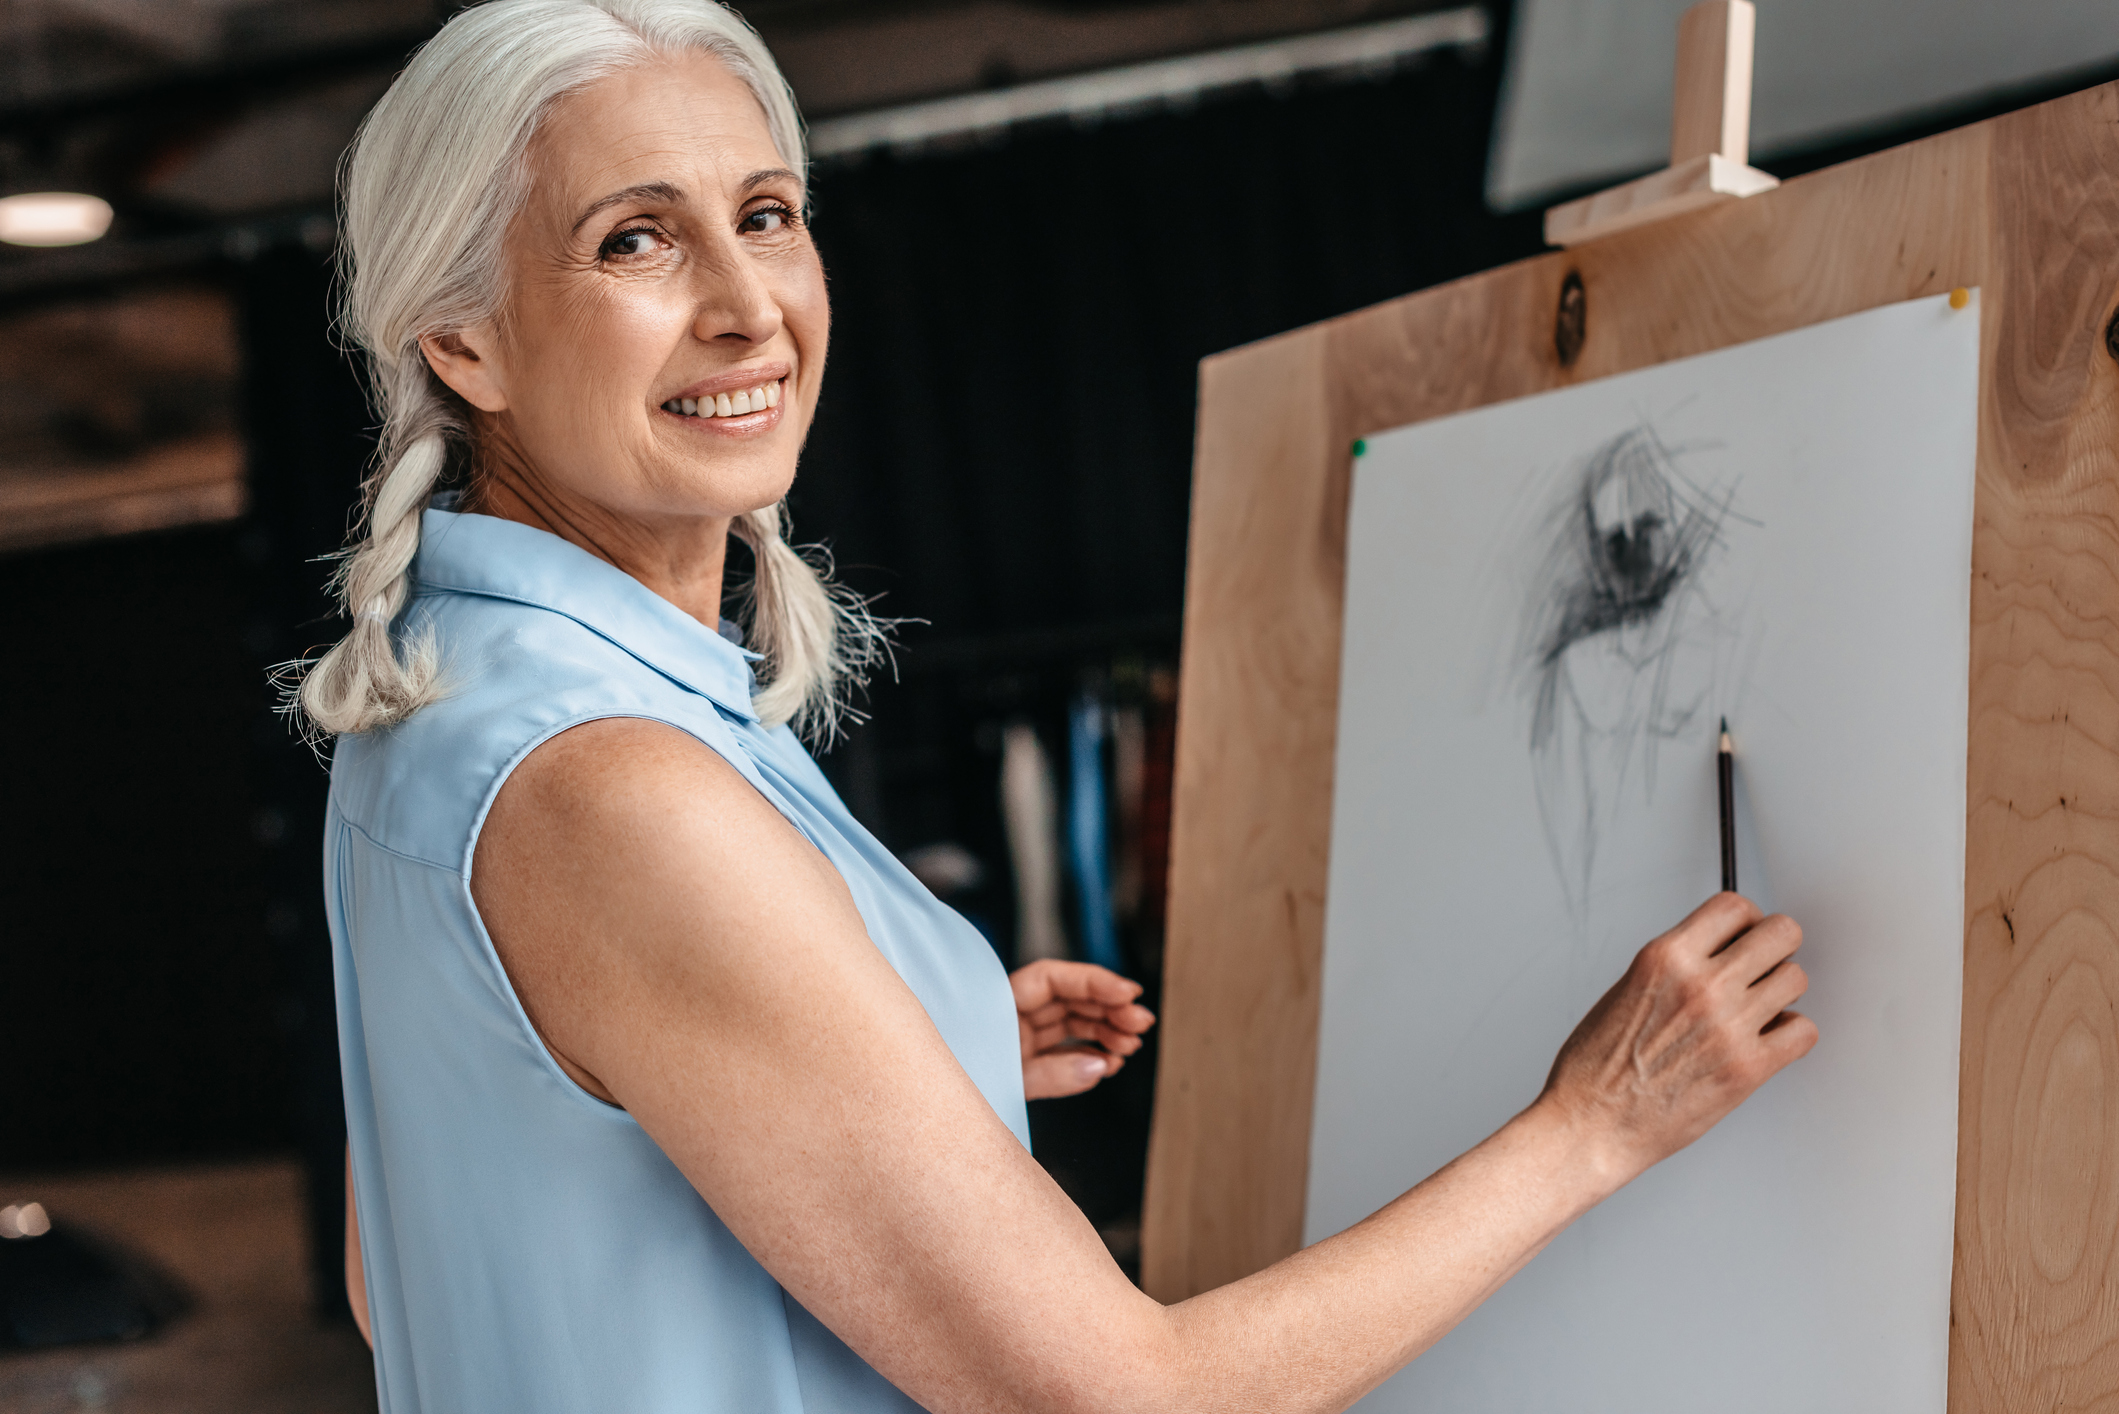 Learn How to Draw in Retirement Miles financial Group